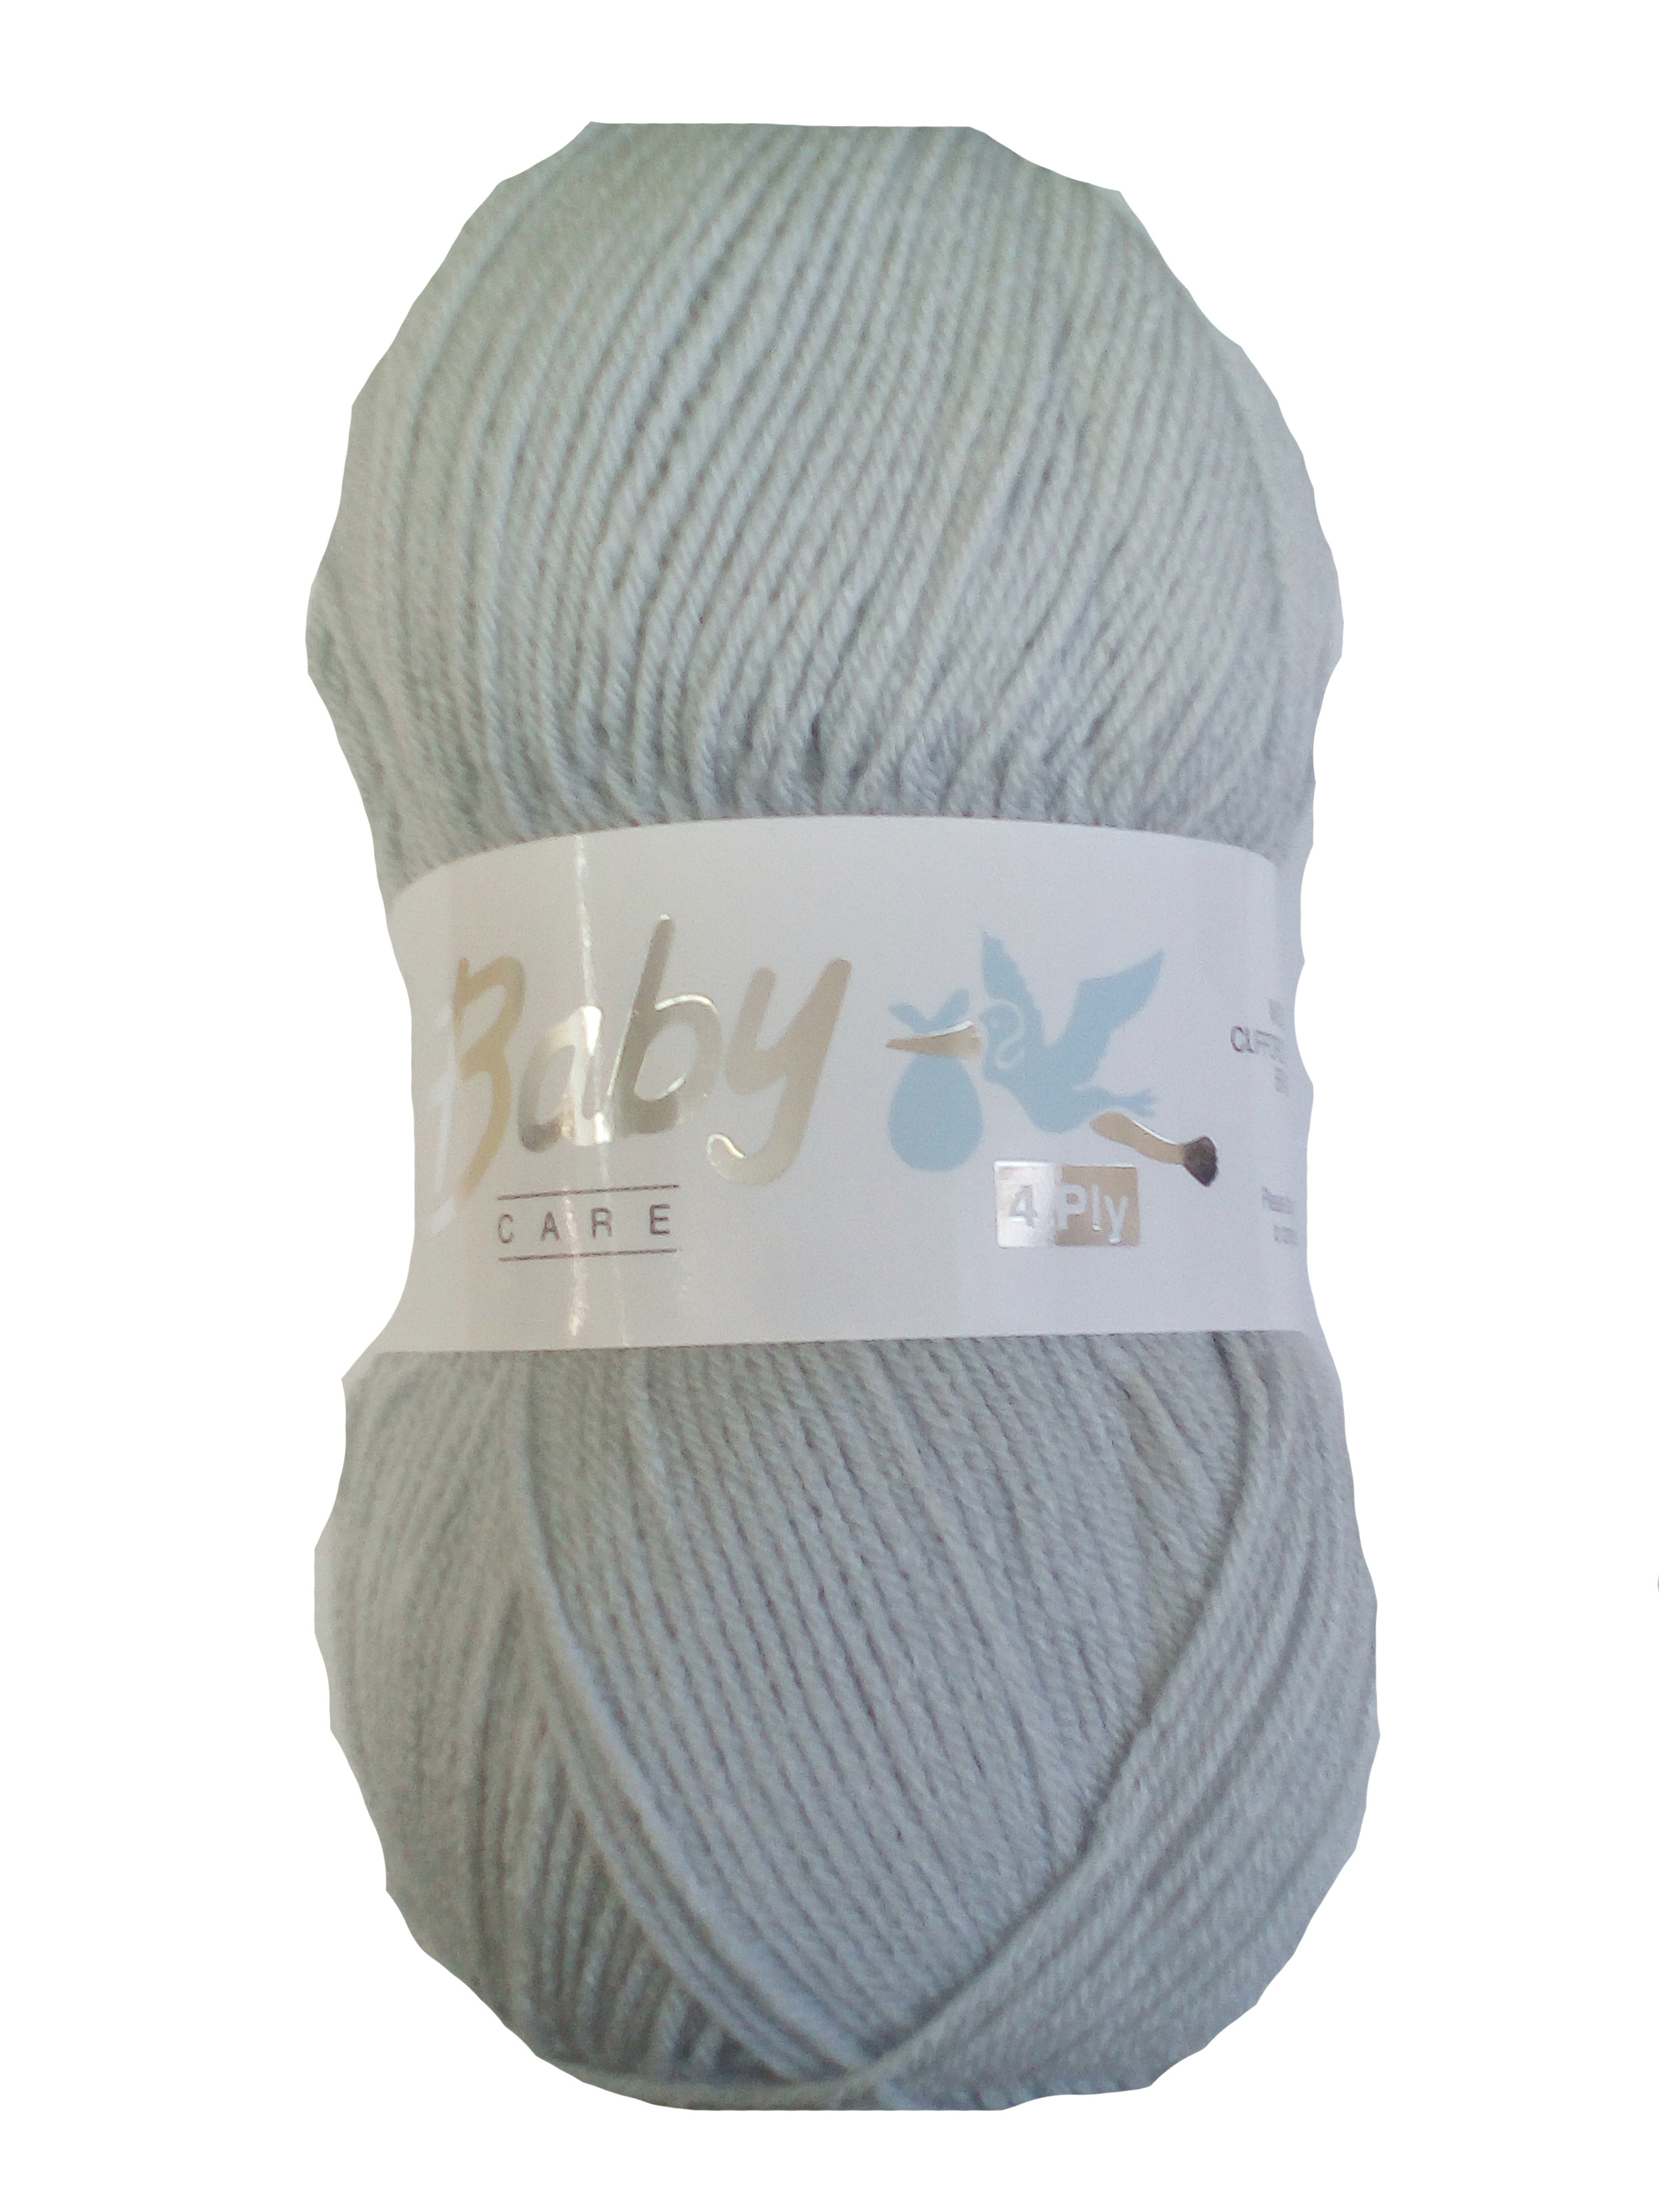 Baby Care 4 Ply Yarn 10 x100g Balls Silver - Click Image to Close